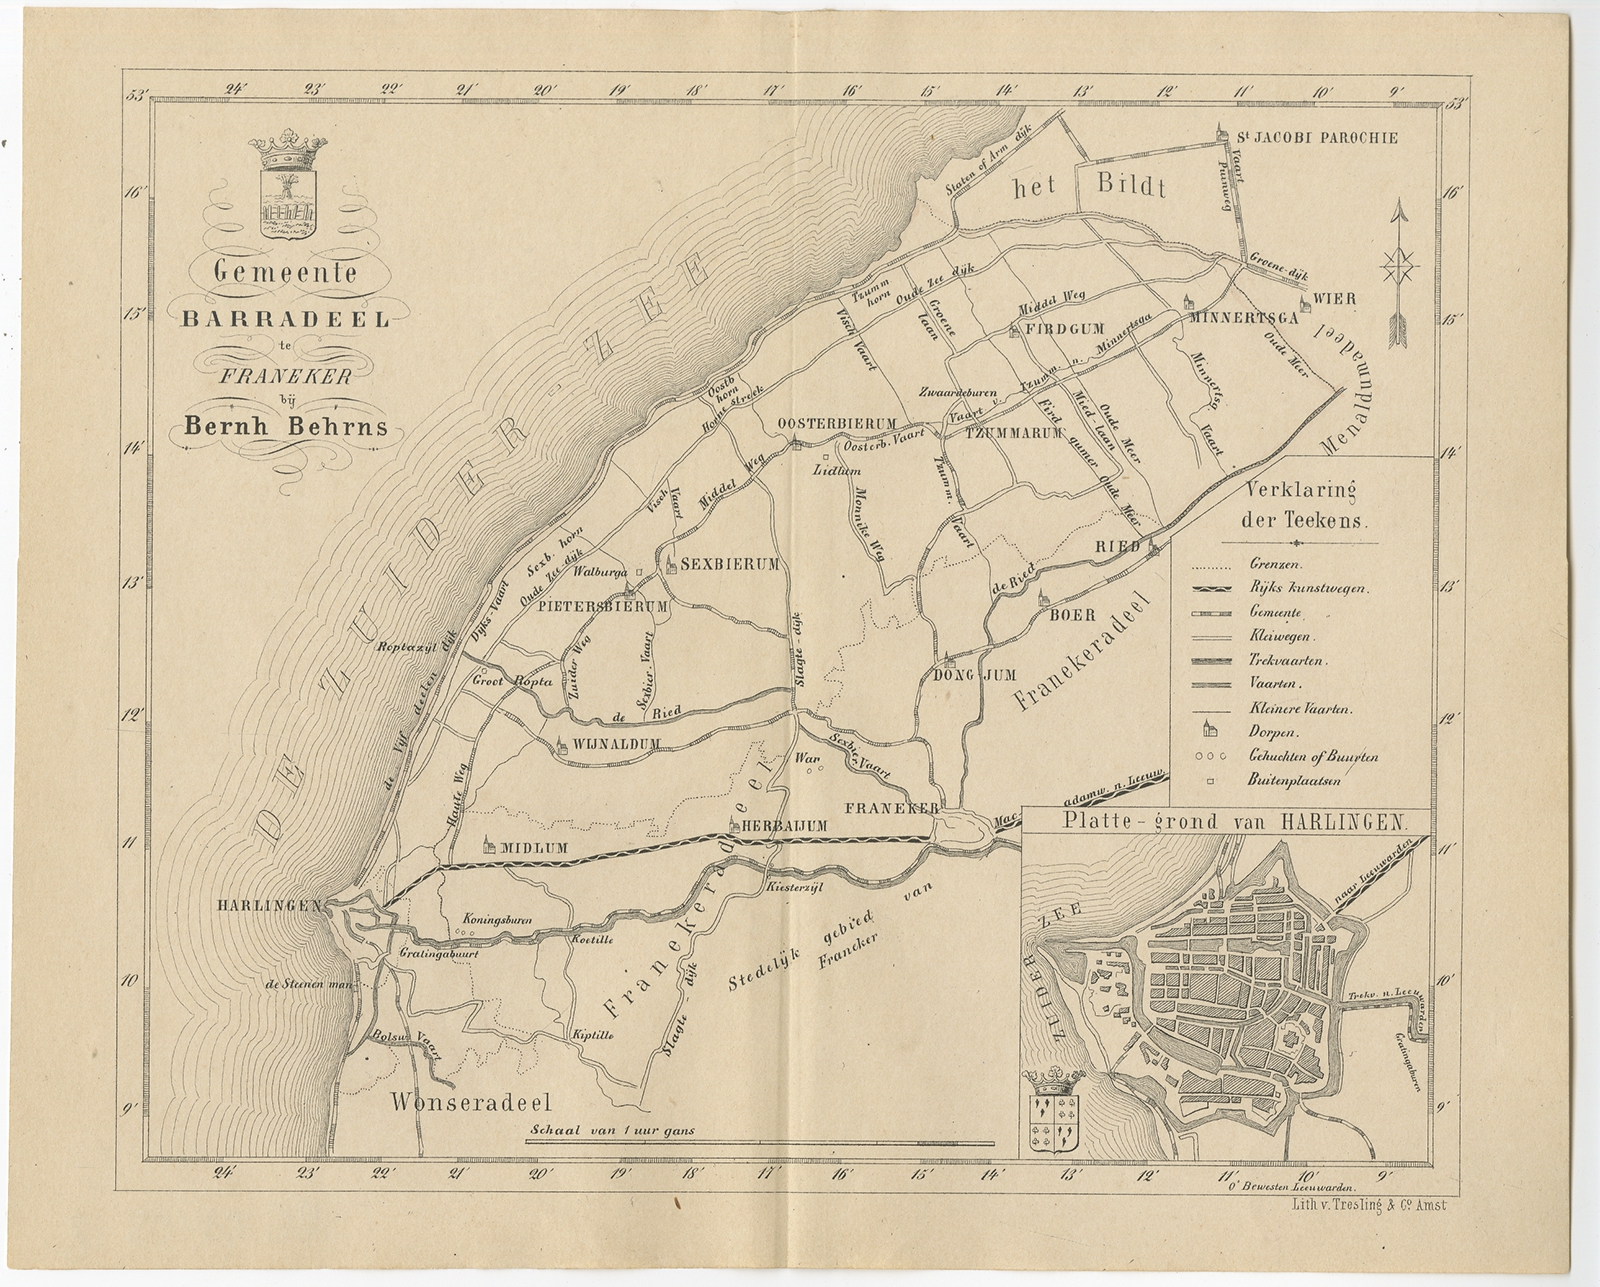 Antique Map of the Barradeel township by Behrns (1861)